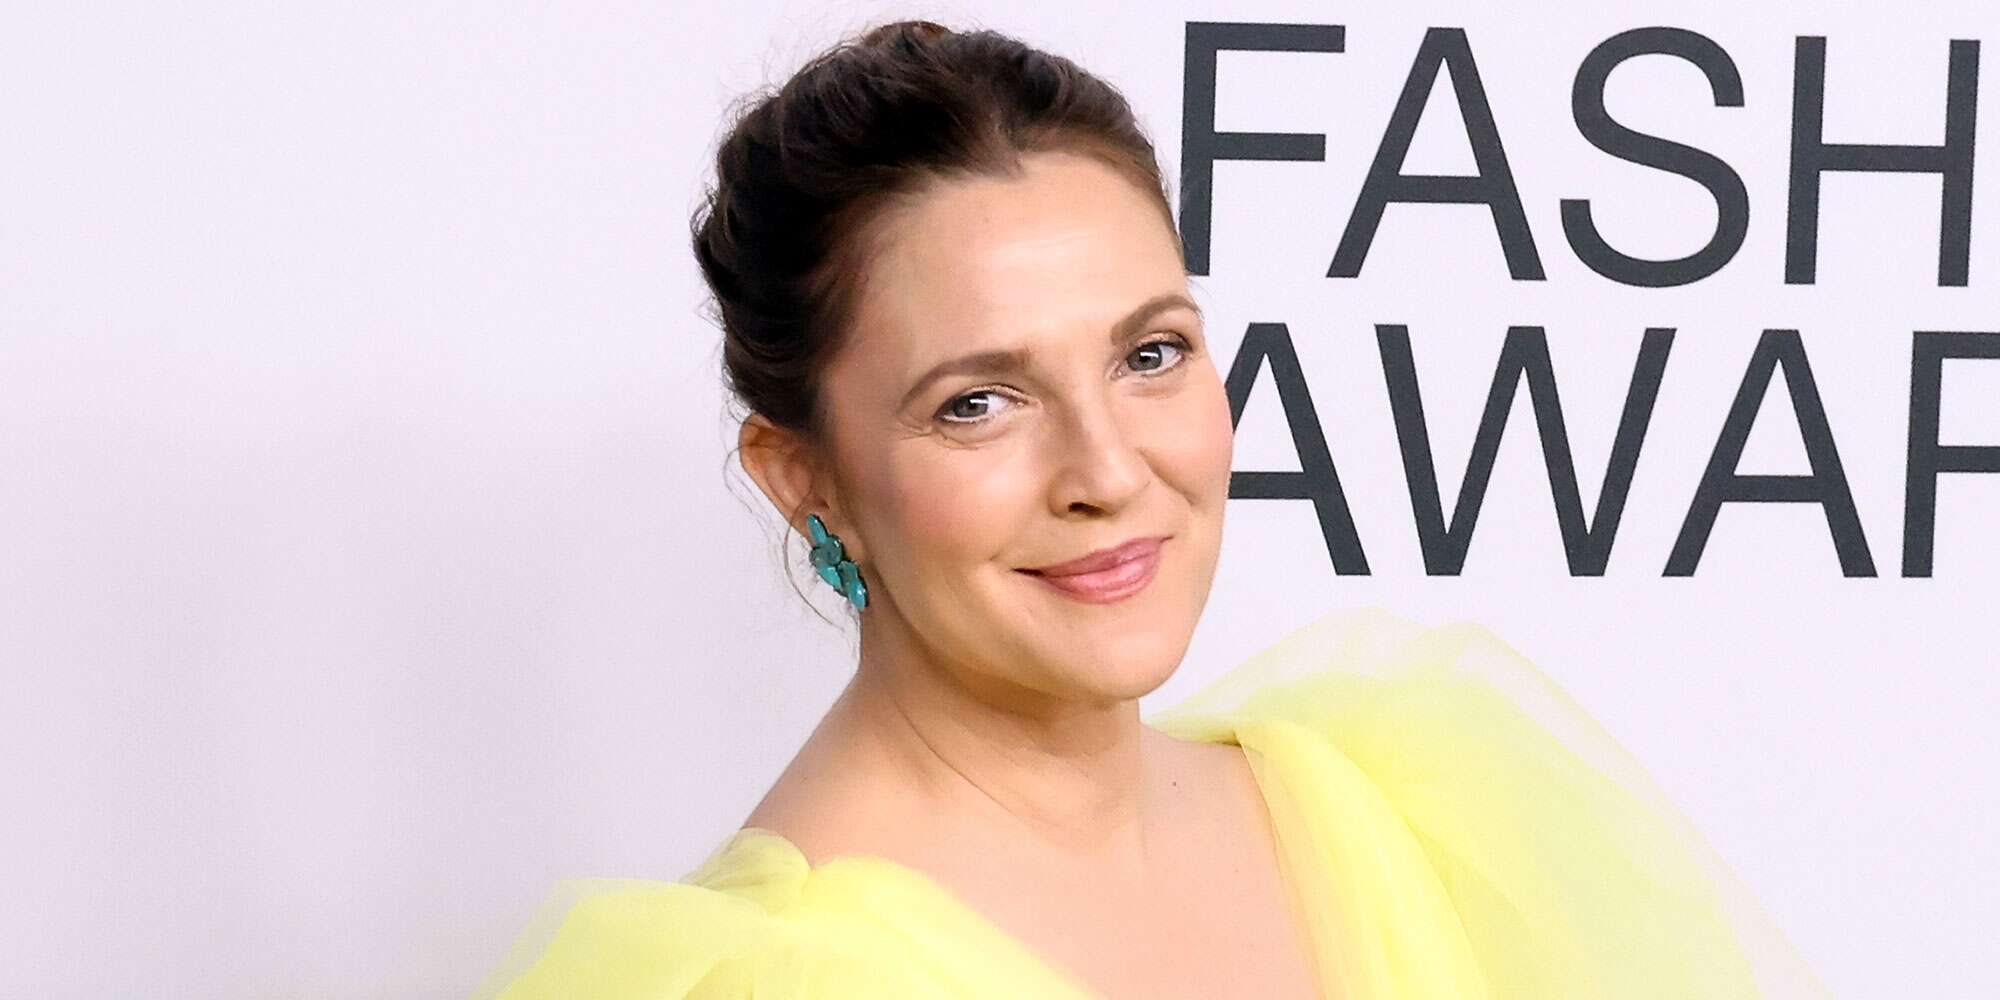 Drew Barrymore loses it over the rain in adorable new Instagram video